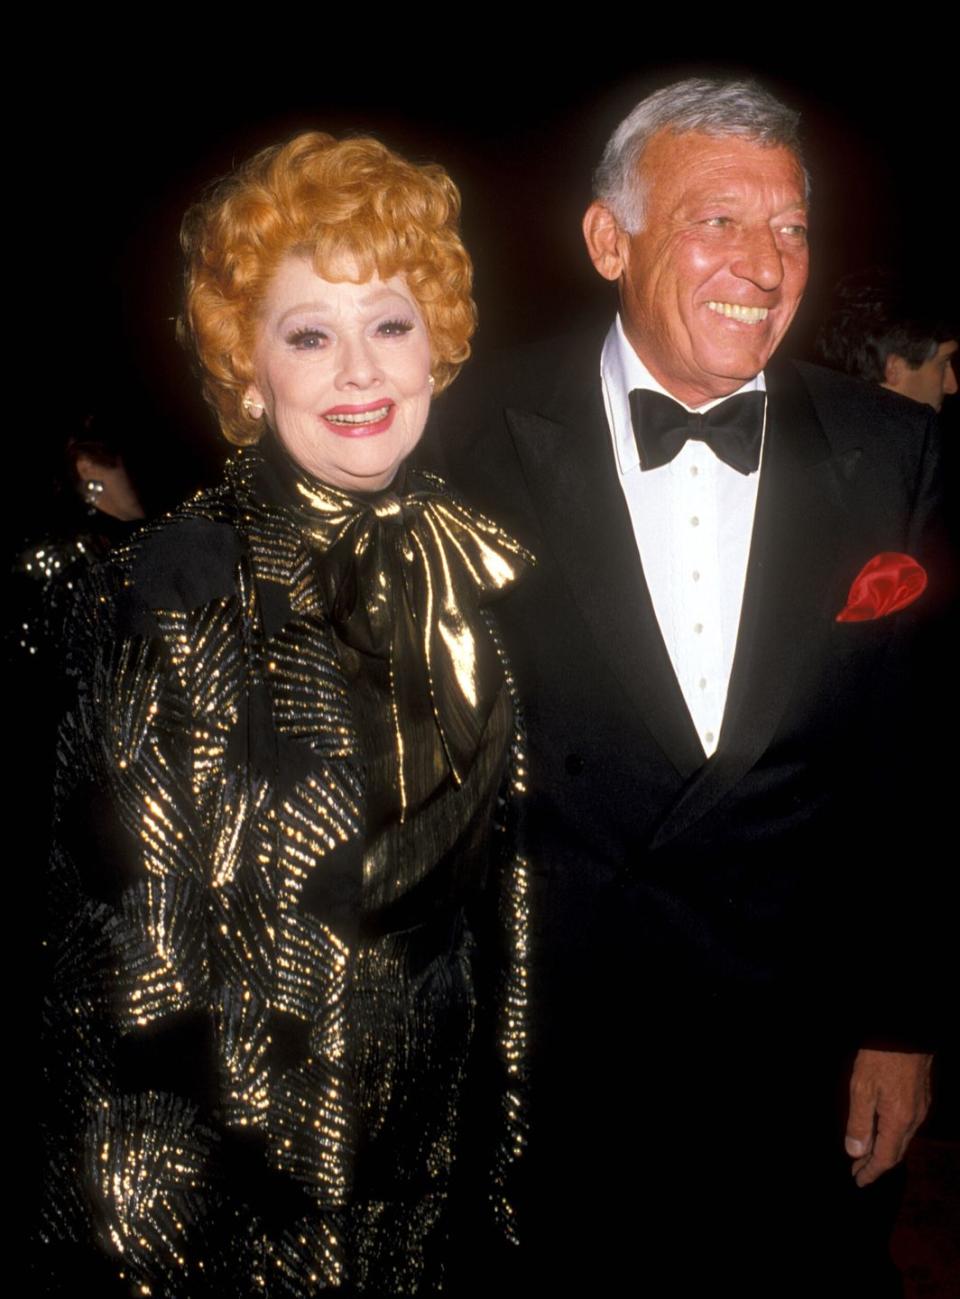 1987: Grinning with Gary in a gorgeous golden and black gown.